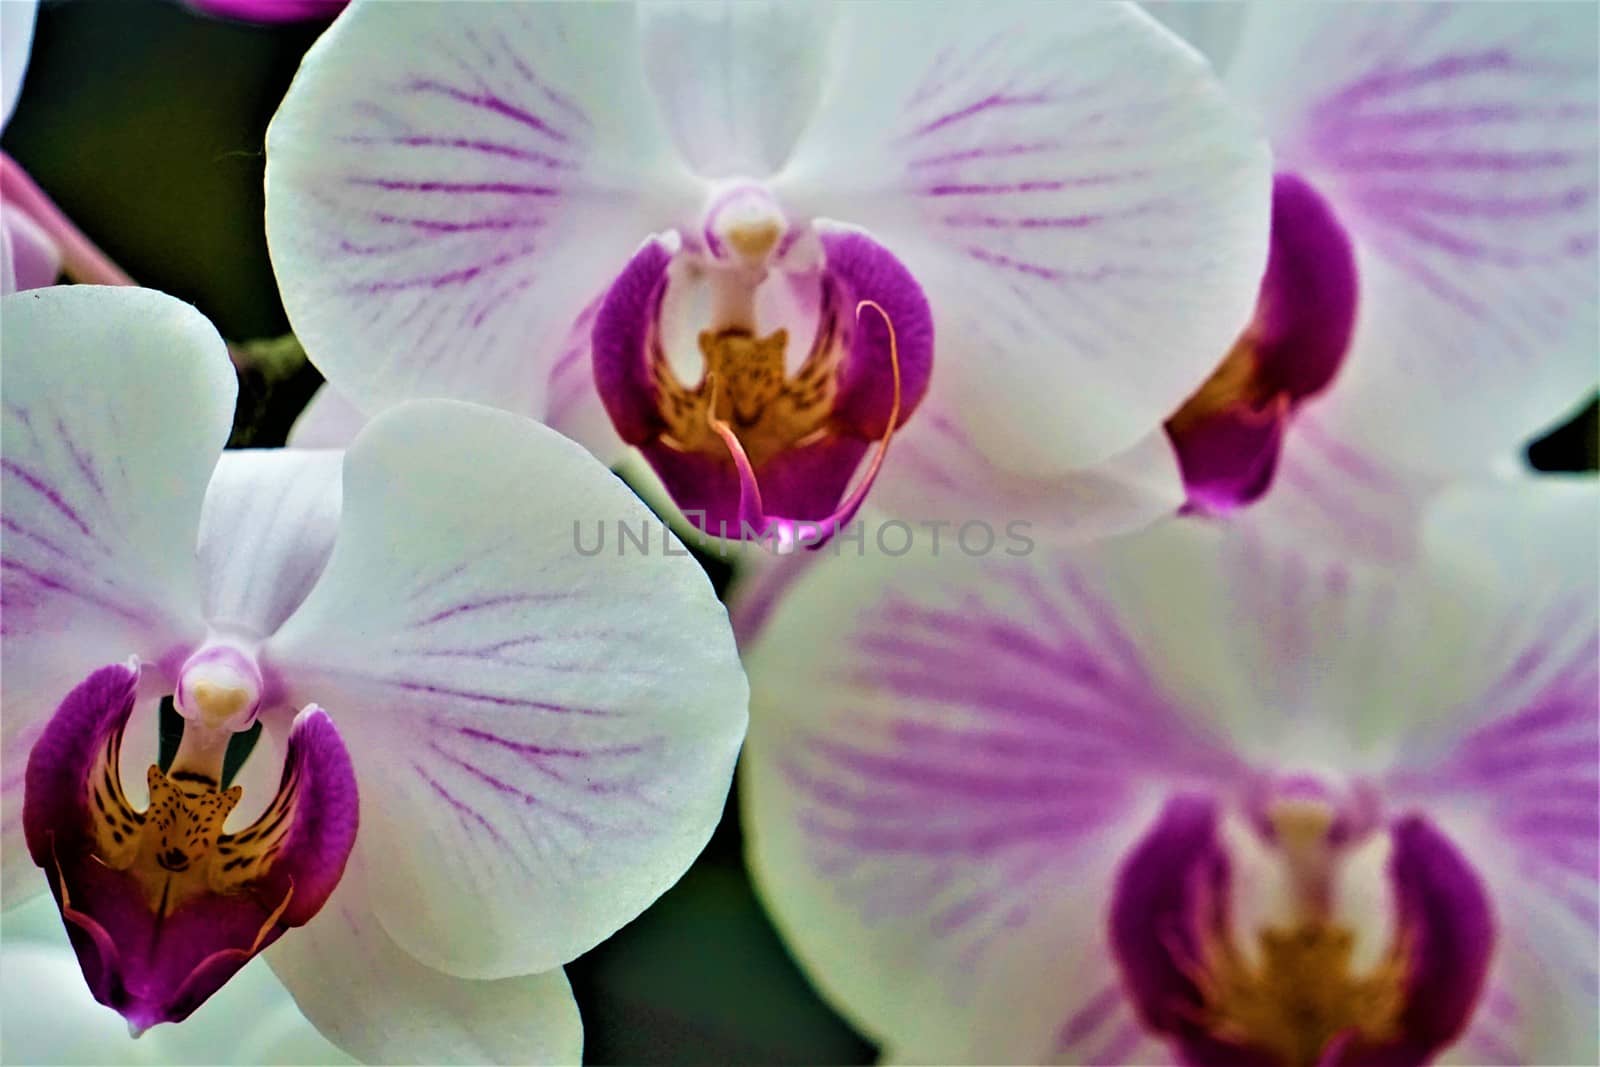 A blossom of a pink and white striped Phalaenopsis orchid